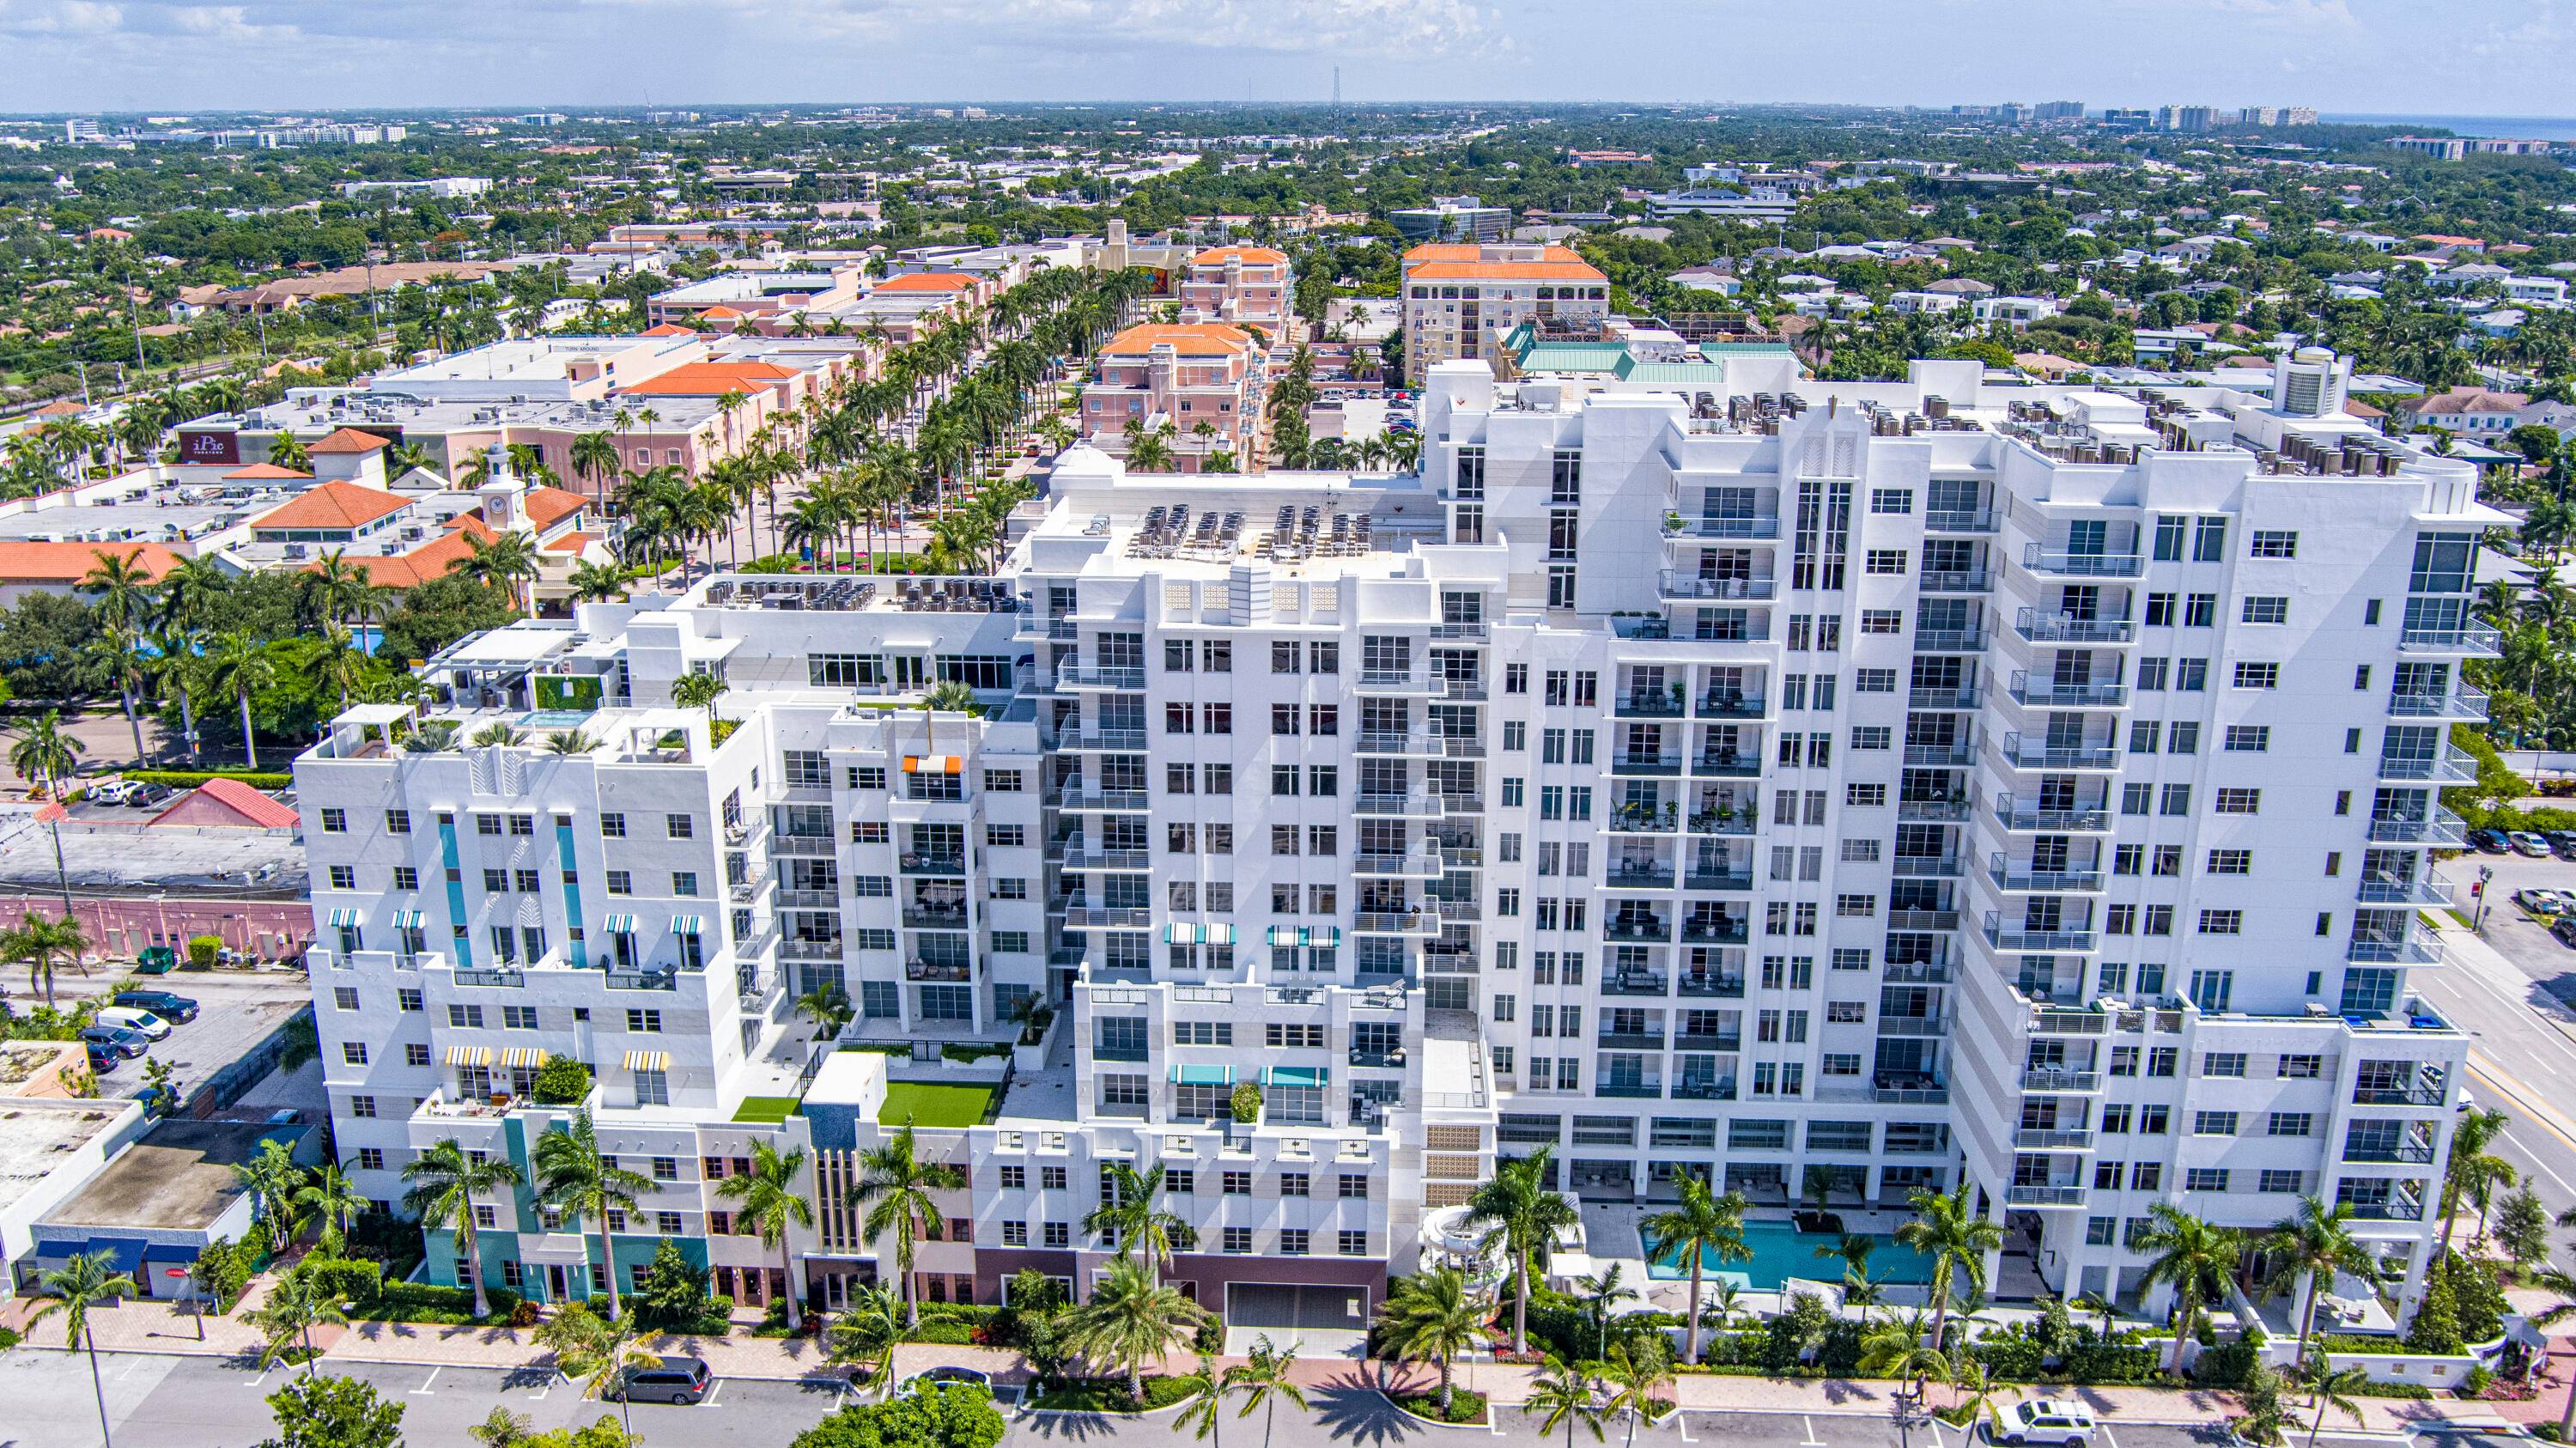 SITUATED IN THE HEART OF DOWNTOWN BOCA RATON, IN A PRIME LOCATION ADJOINING MIZNER PARK, TOWER 155 IS ONE OF BOCA'S NEWEST RESIDENTIAL TOWERS, OFFERING LUXURIOUS AMENITIES SUCH AS VALET, ...